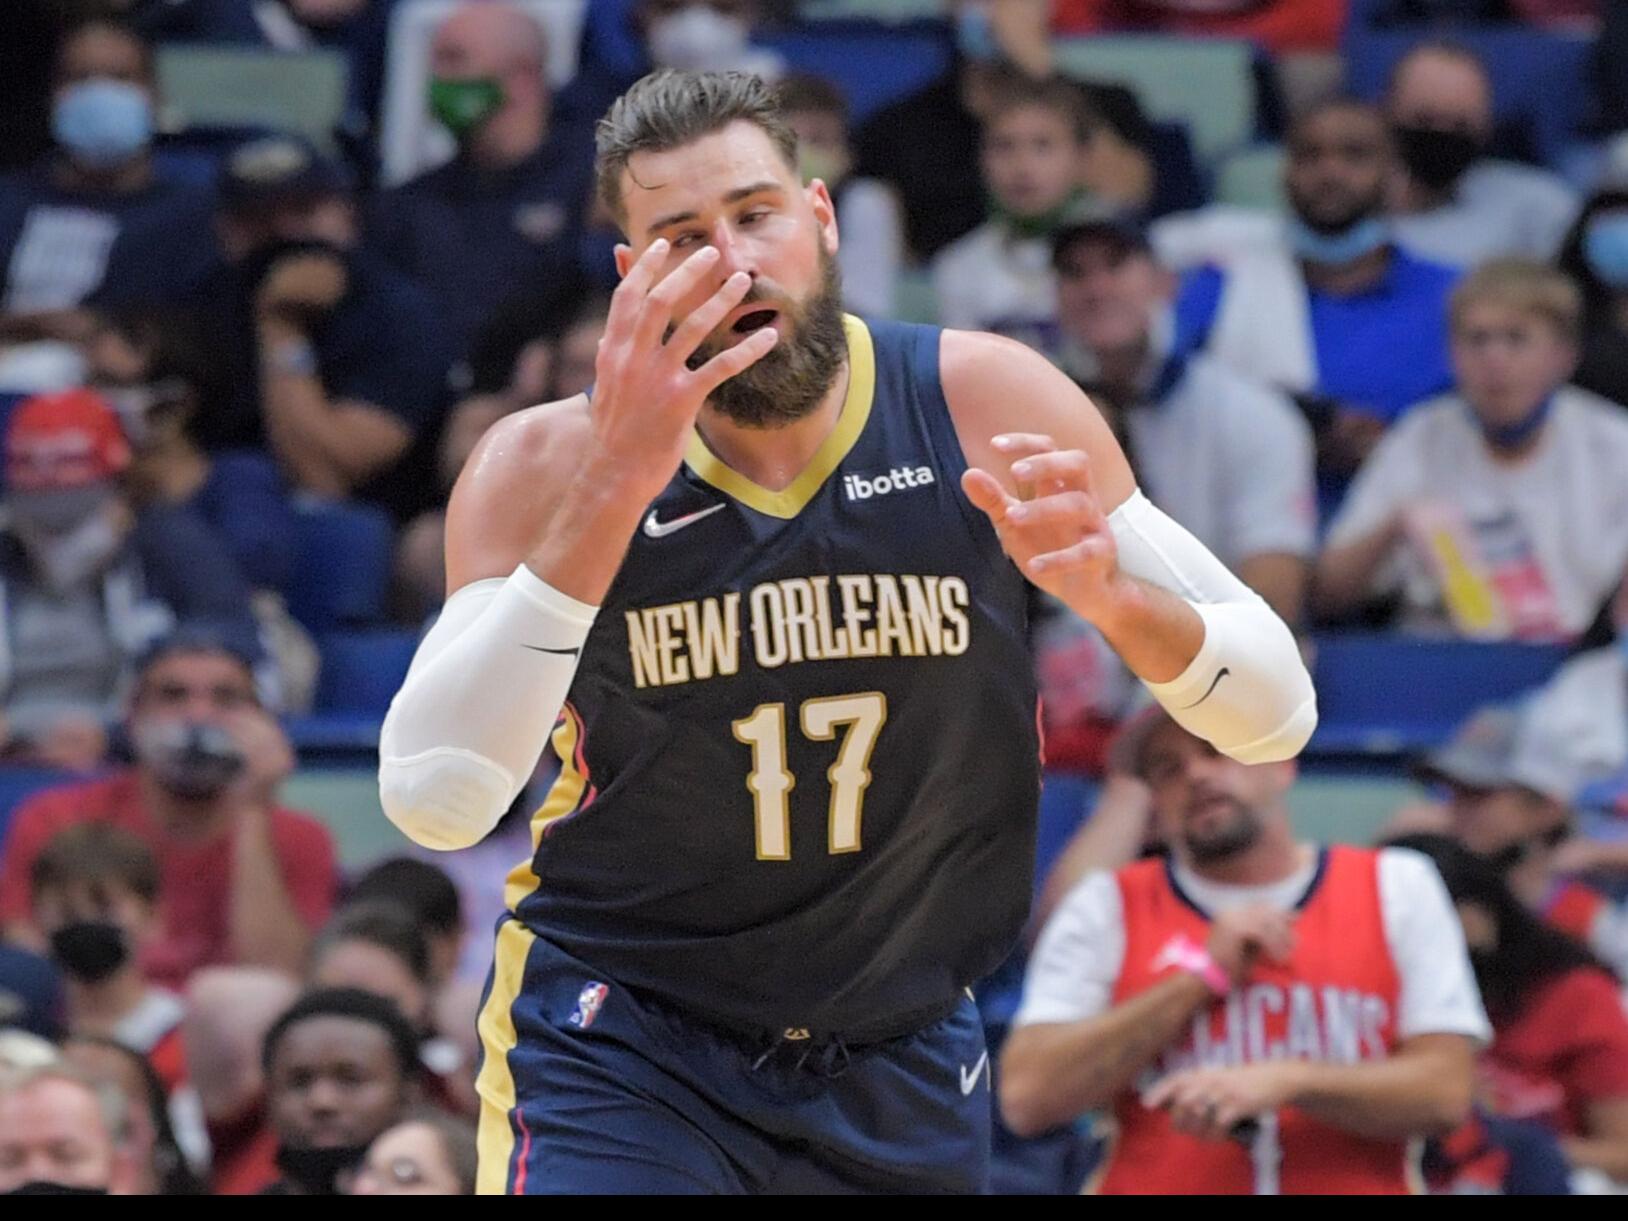 New Orleans Pelicans and Ibotta announce new partnership